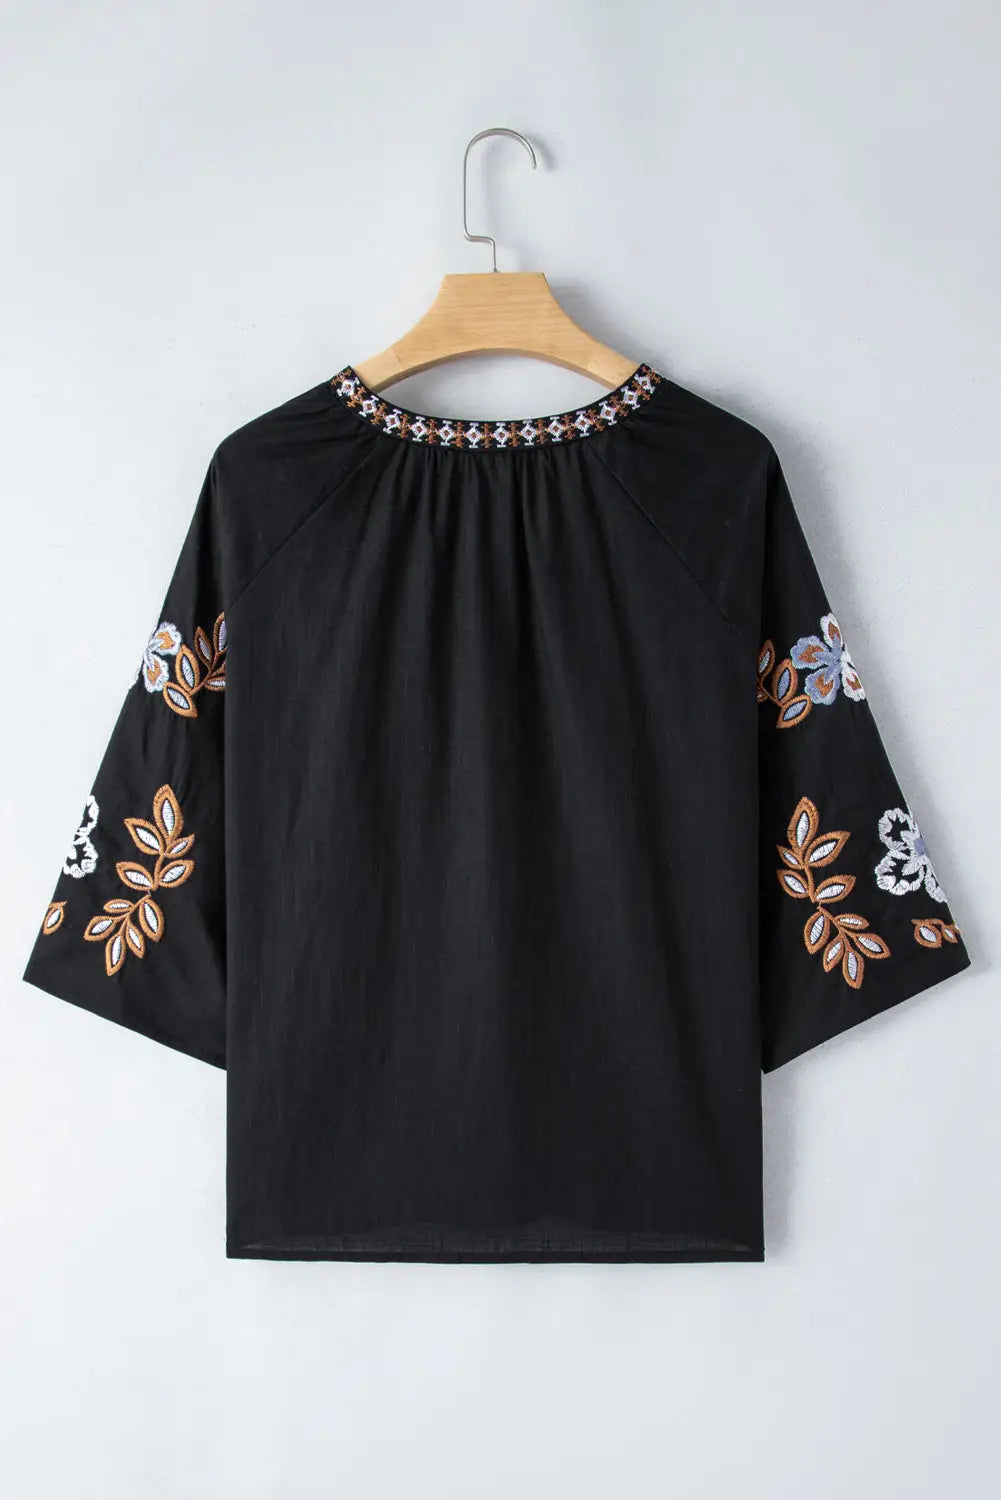 Black bohemian floral embroidered v neck blouse - tops/blouses & shirts